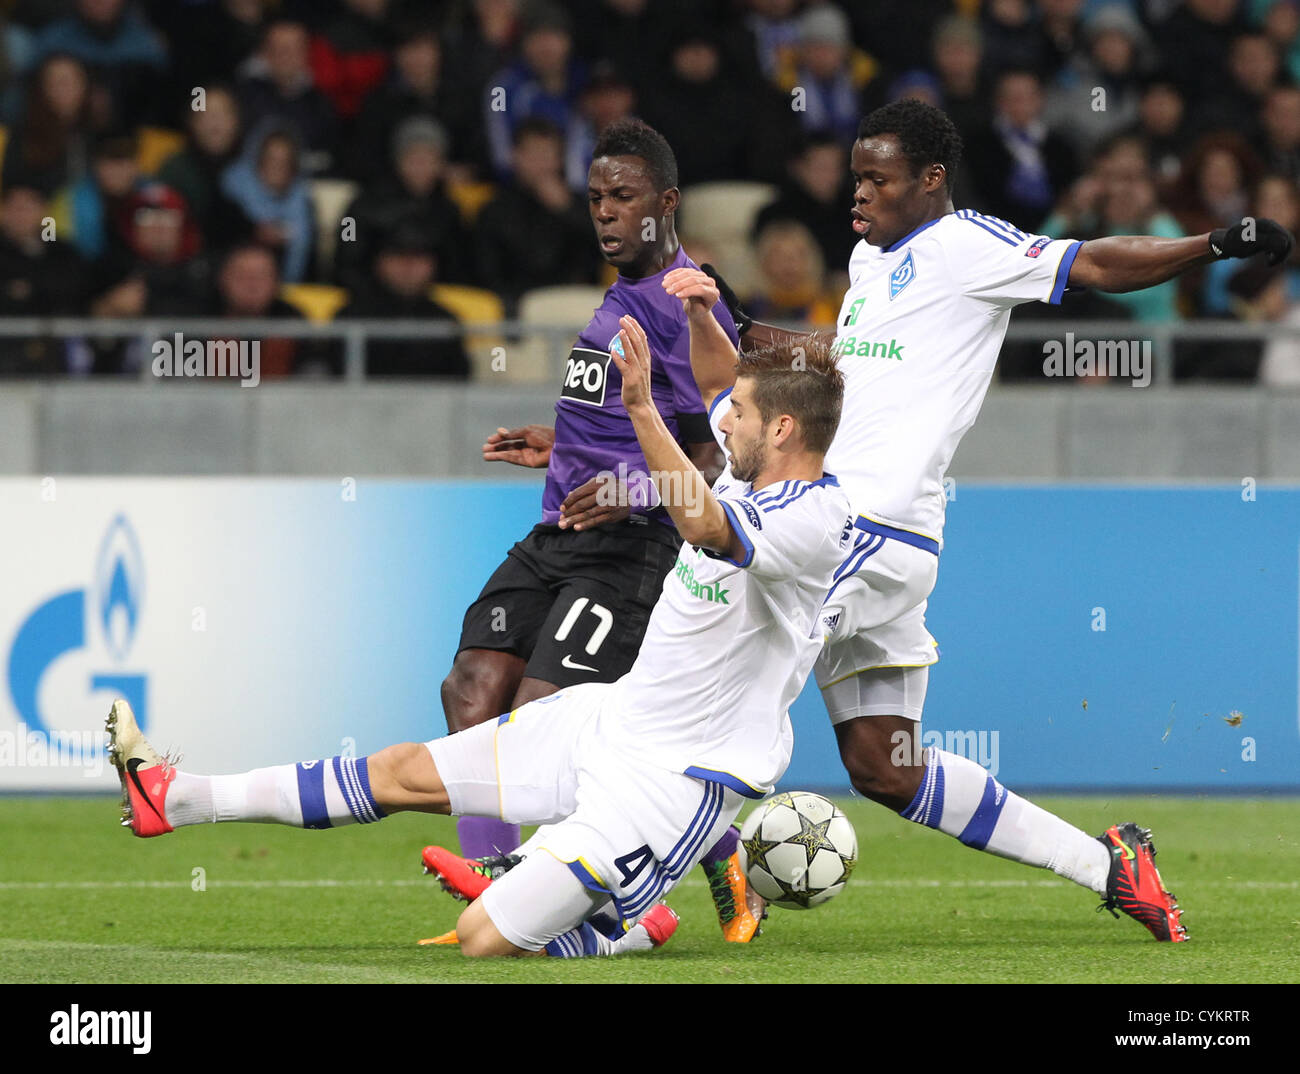 06.11.2012 Silvestre Varela (L) of Porto, Taye Taiwo(R) and Miguel Veloso (C) of Dynamo Kiev during their UEFA Champions League, Group stage (Group A) soccer match of Ukrainian FC Dynamo Kiev vs FC Porto of Portugal on the Olimpiyskiy stadium in Kiev. Stock Photo